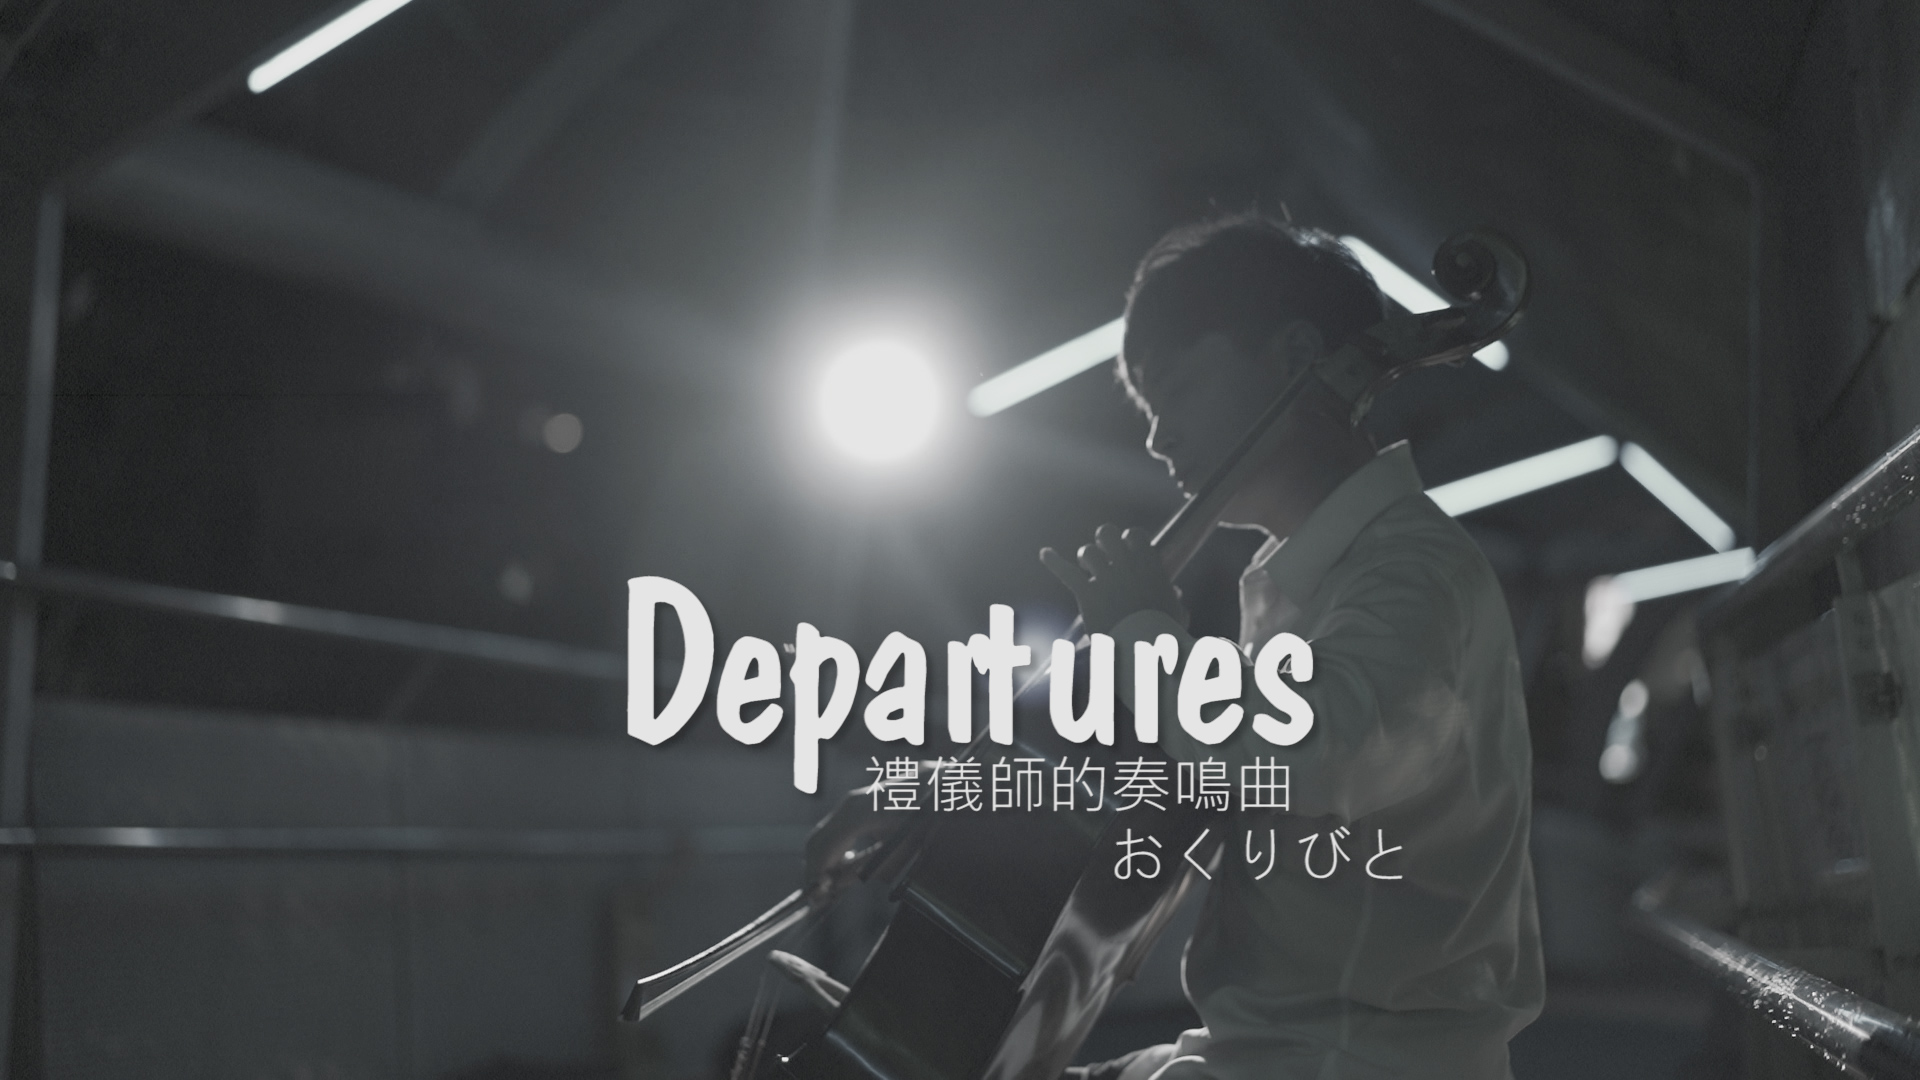 《Memory》from “Departures” ,《おくりびと》by 久石讓 《送行者-禮儀師的樂章》『cover by YoYo Cello』